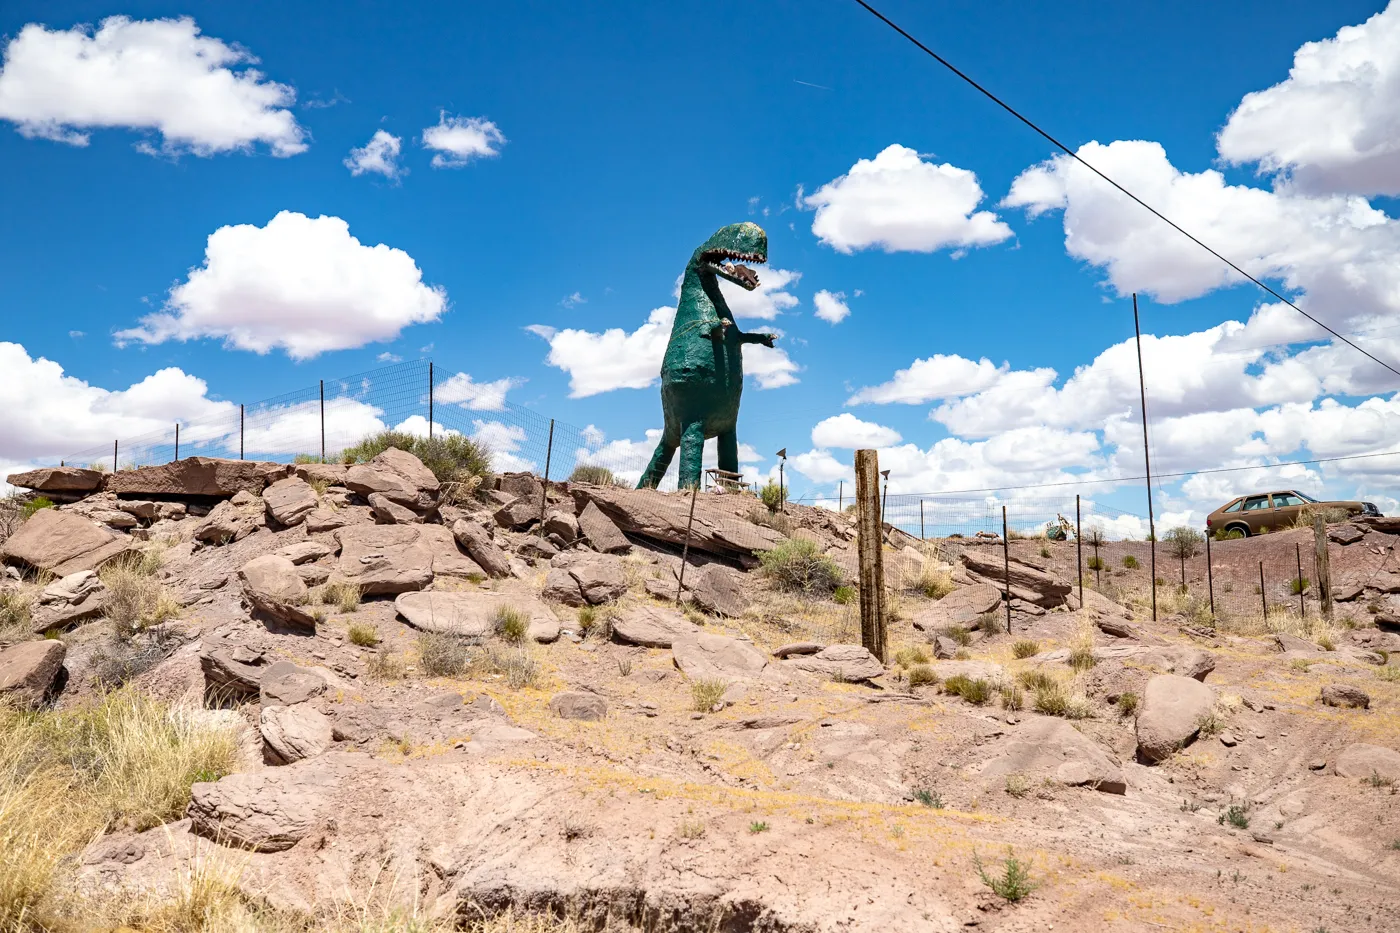 Giant dinosaur eating a woman at Stewart's Petrified Wood in Holbrook, Arizona Route 66 Roadside Attraction